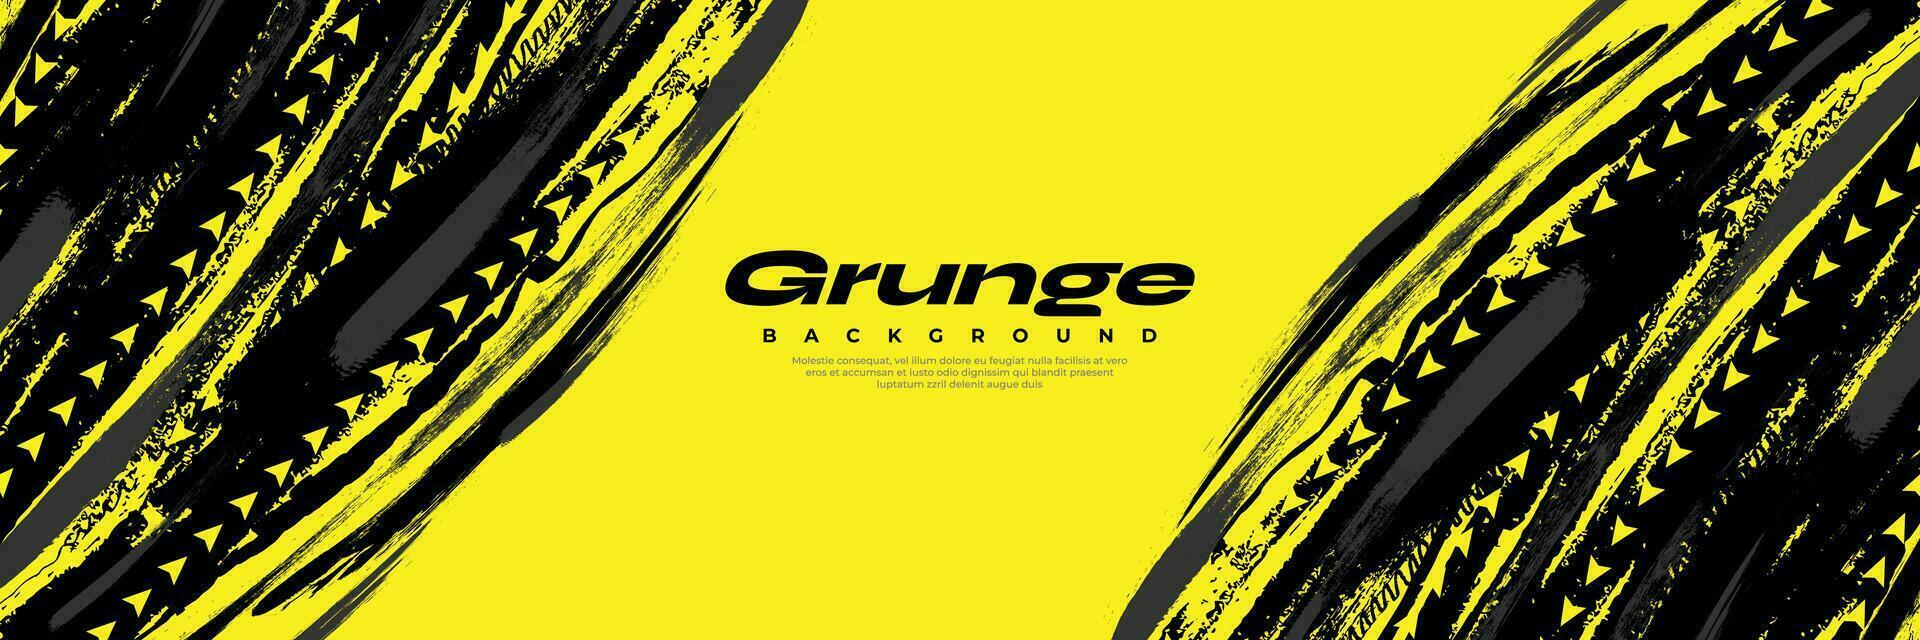 Black Grunge Brush Background with Arrow Isolated on Yellow Background. Sport Background. Scratch and Texture Elements For Design vector